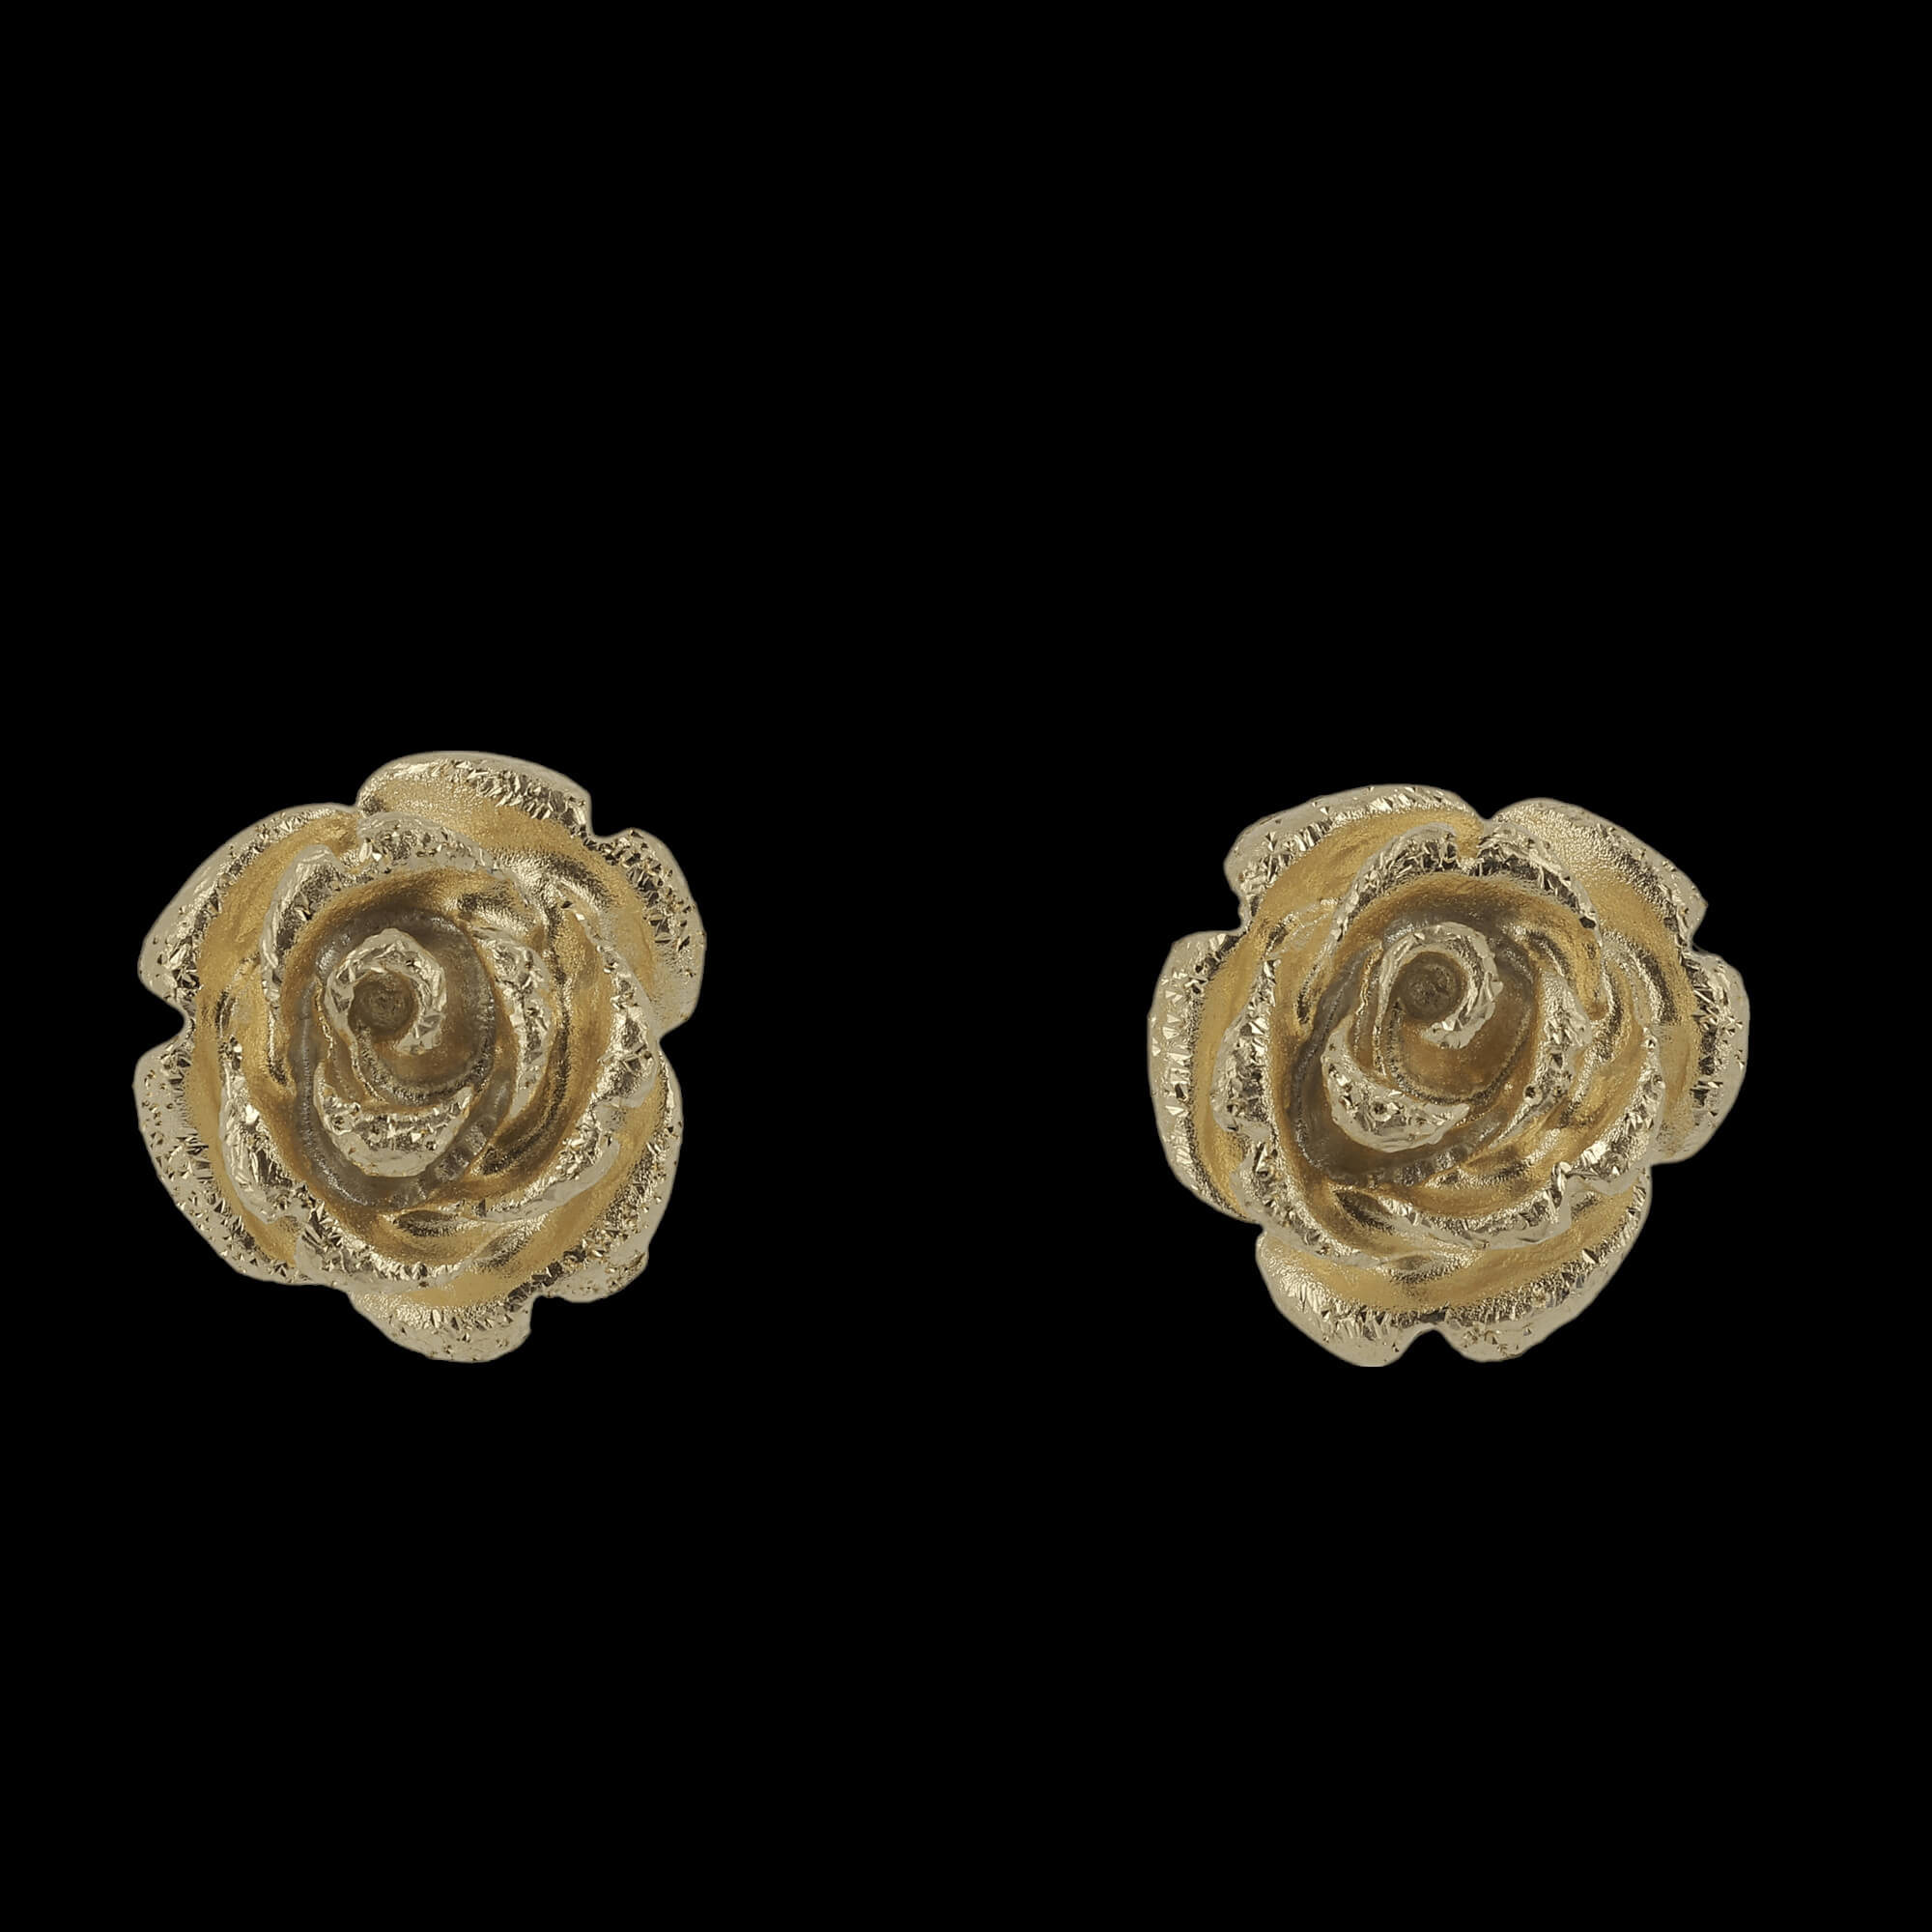 Gilded and beautiful flower earrings